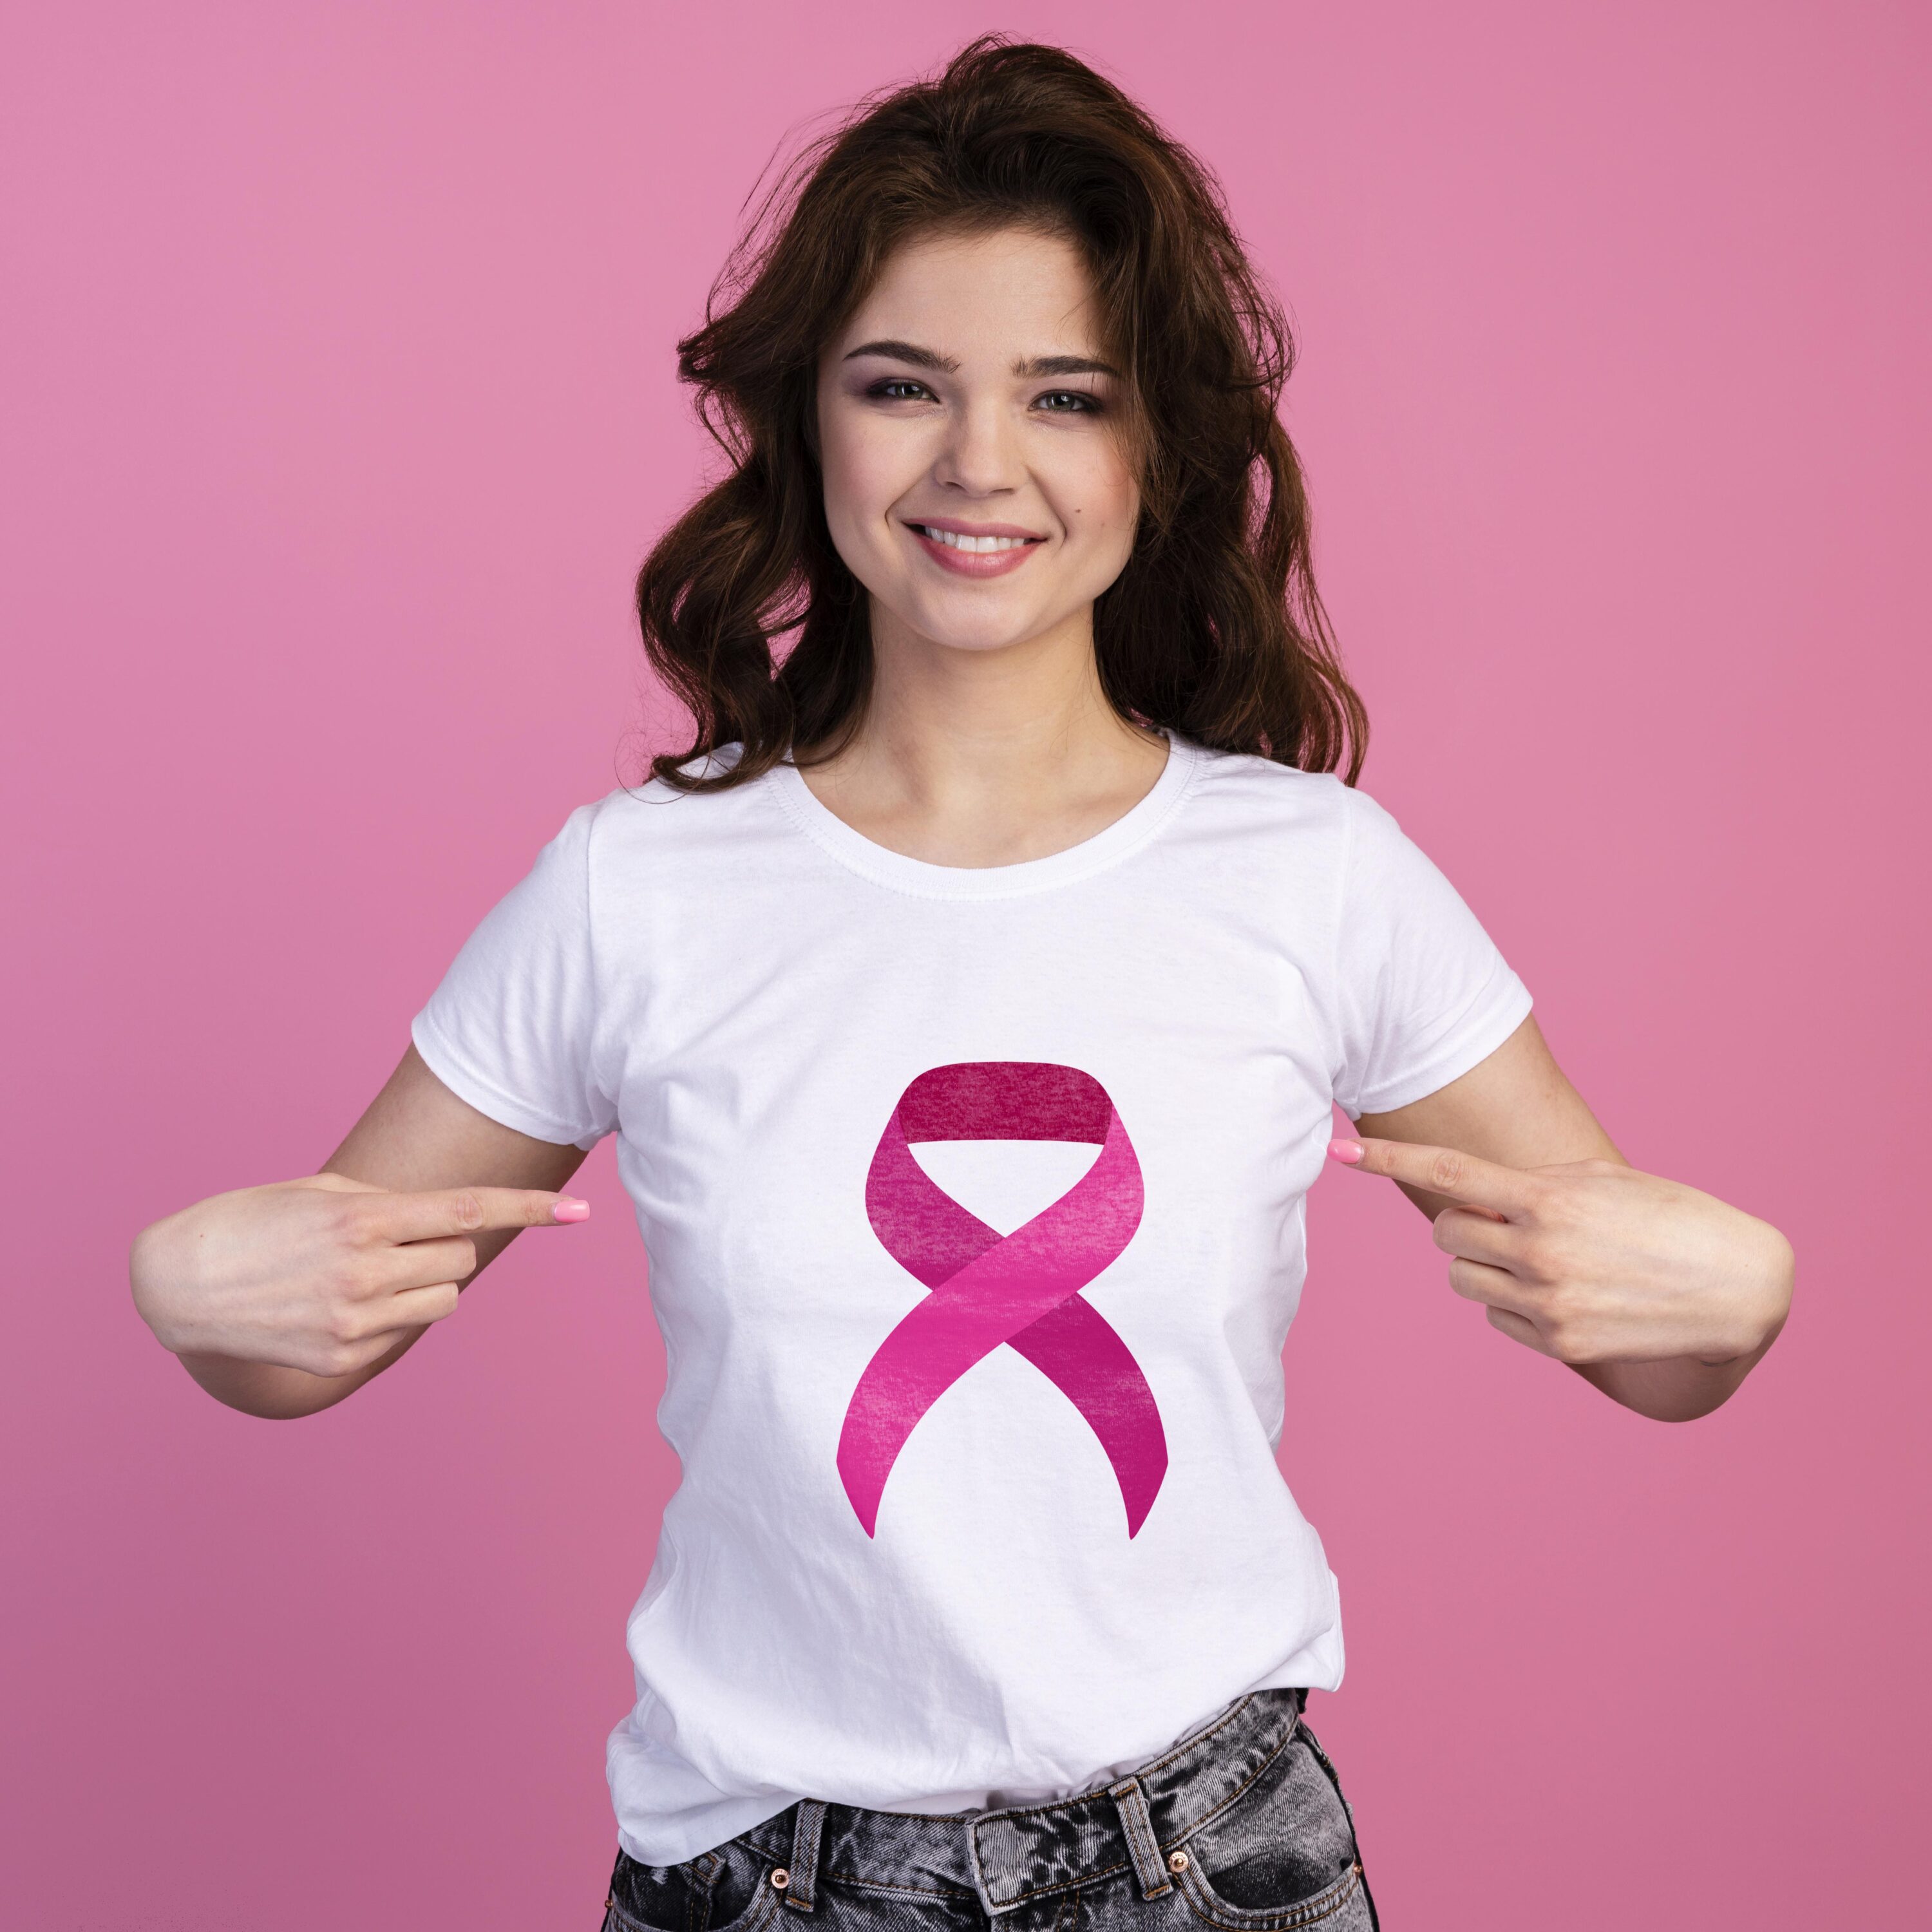 Big pink breast cancer ribbon on the white t-shirt.